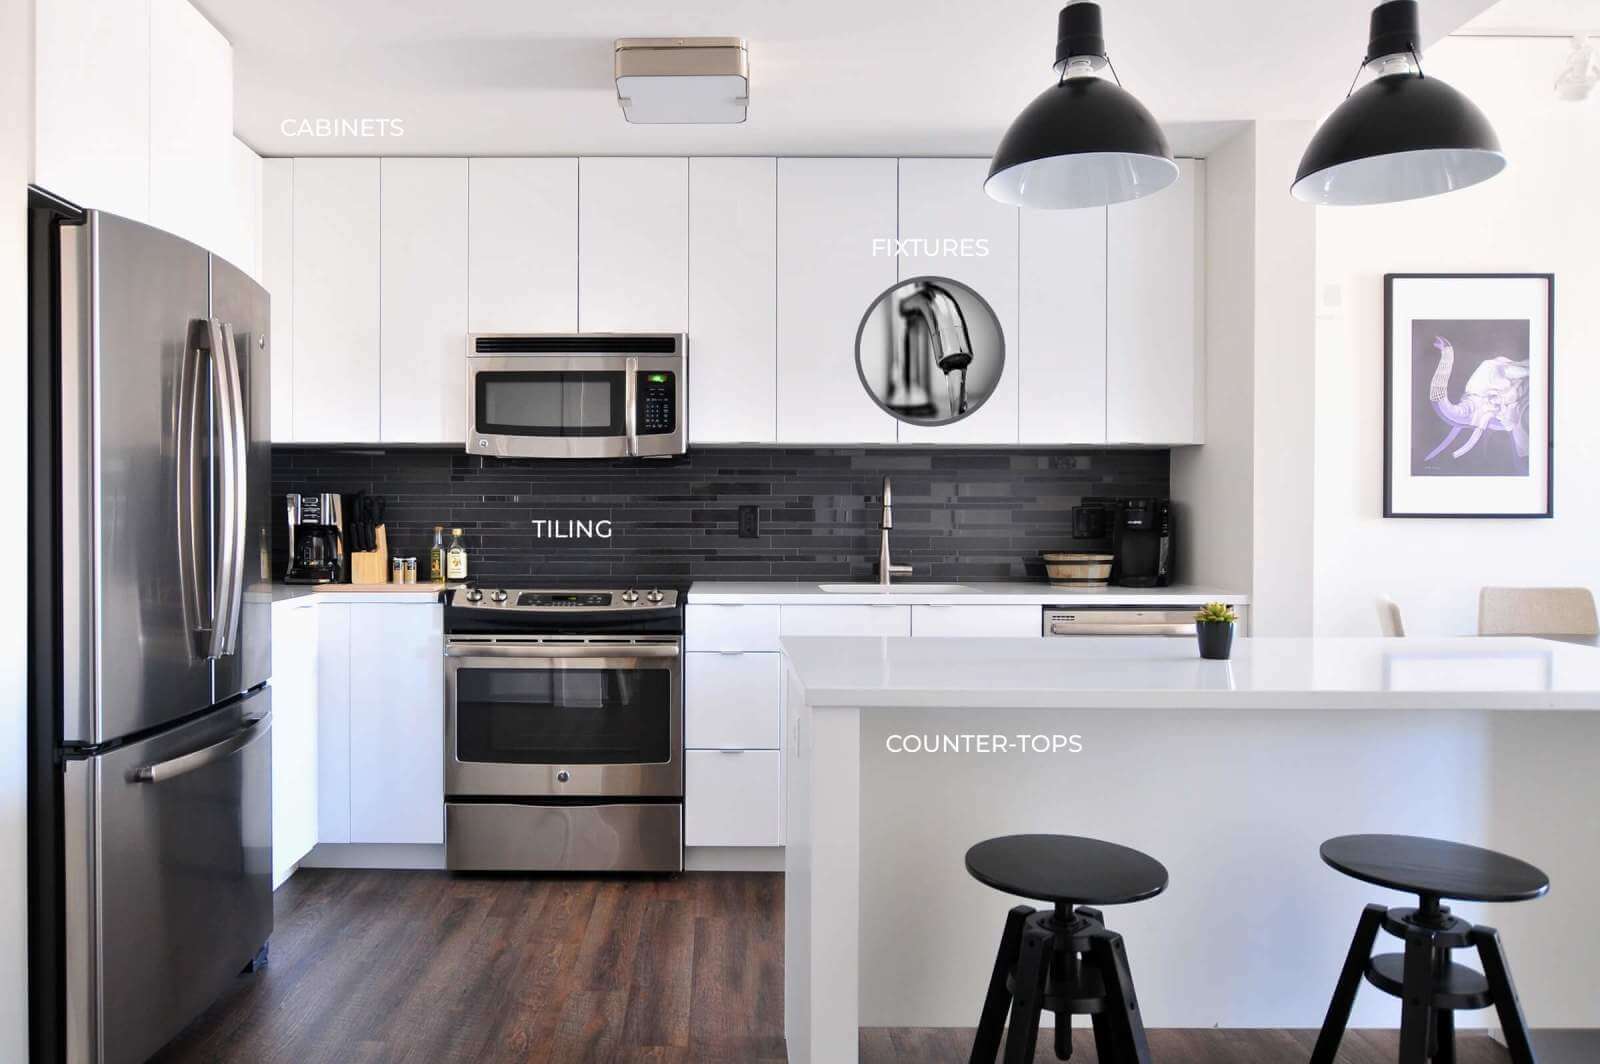 a black and white themed kitchen with a central island, bar stools, and accent lighting